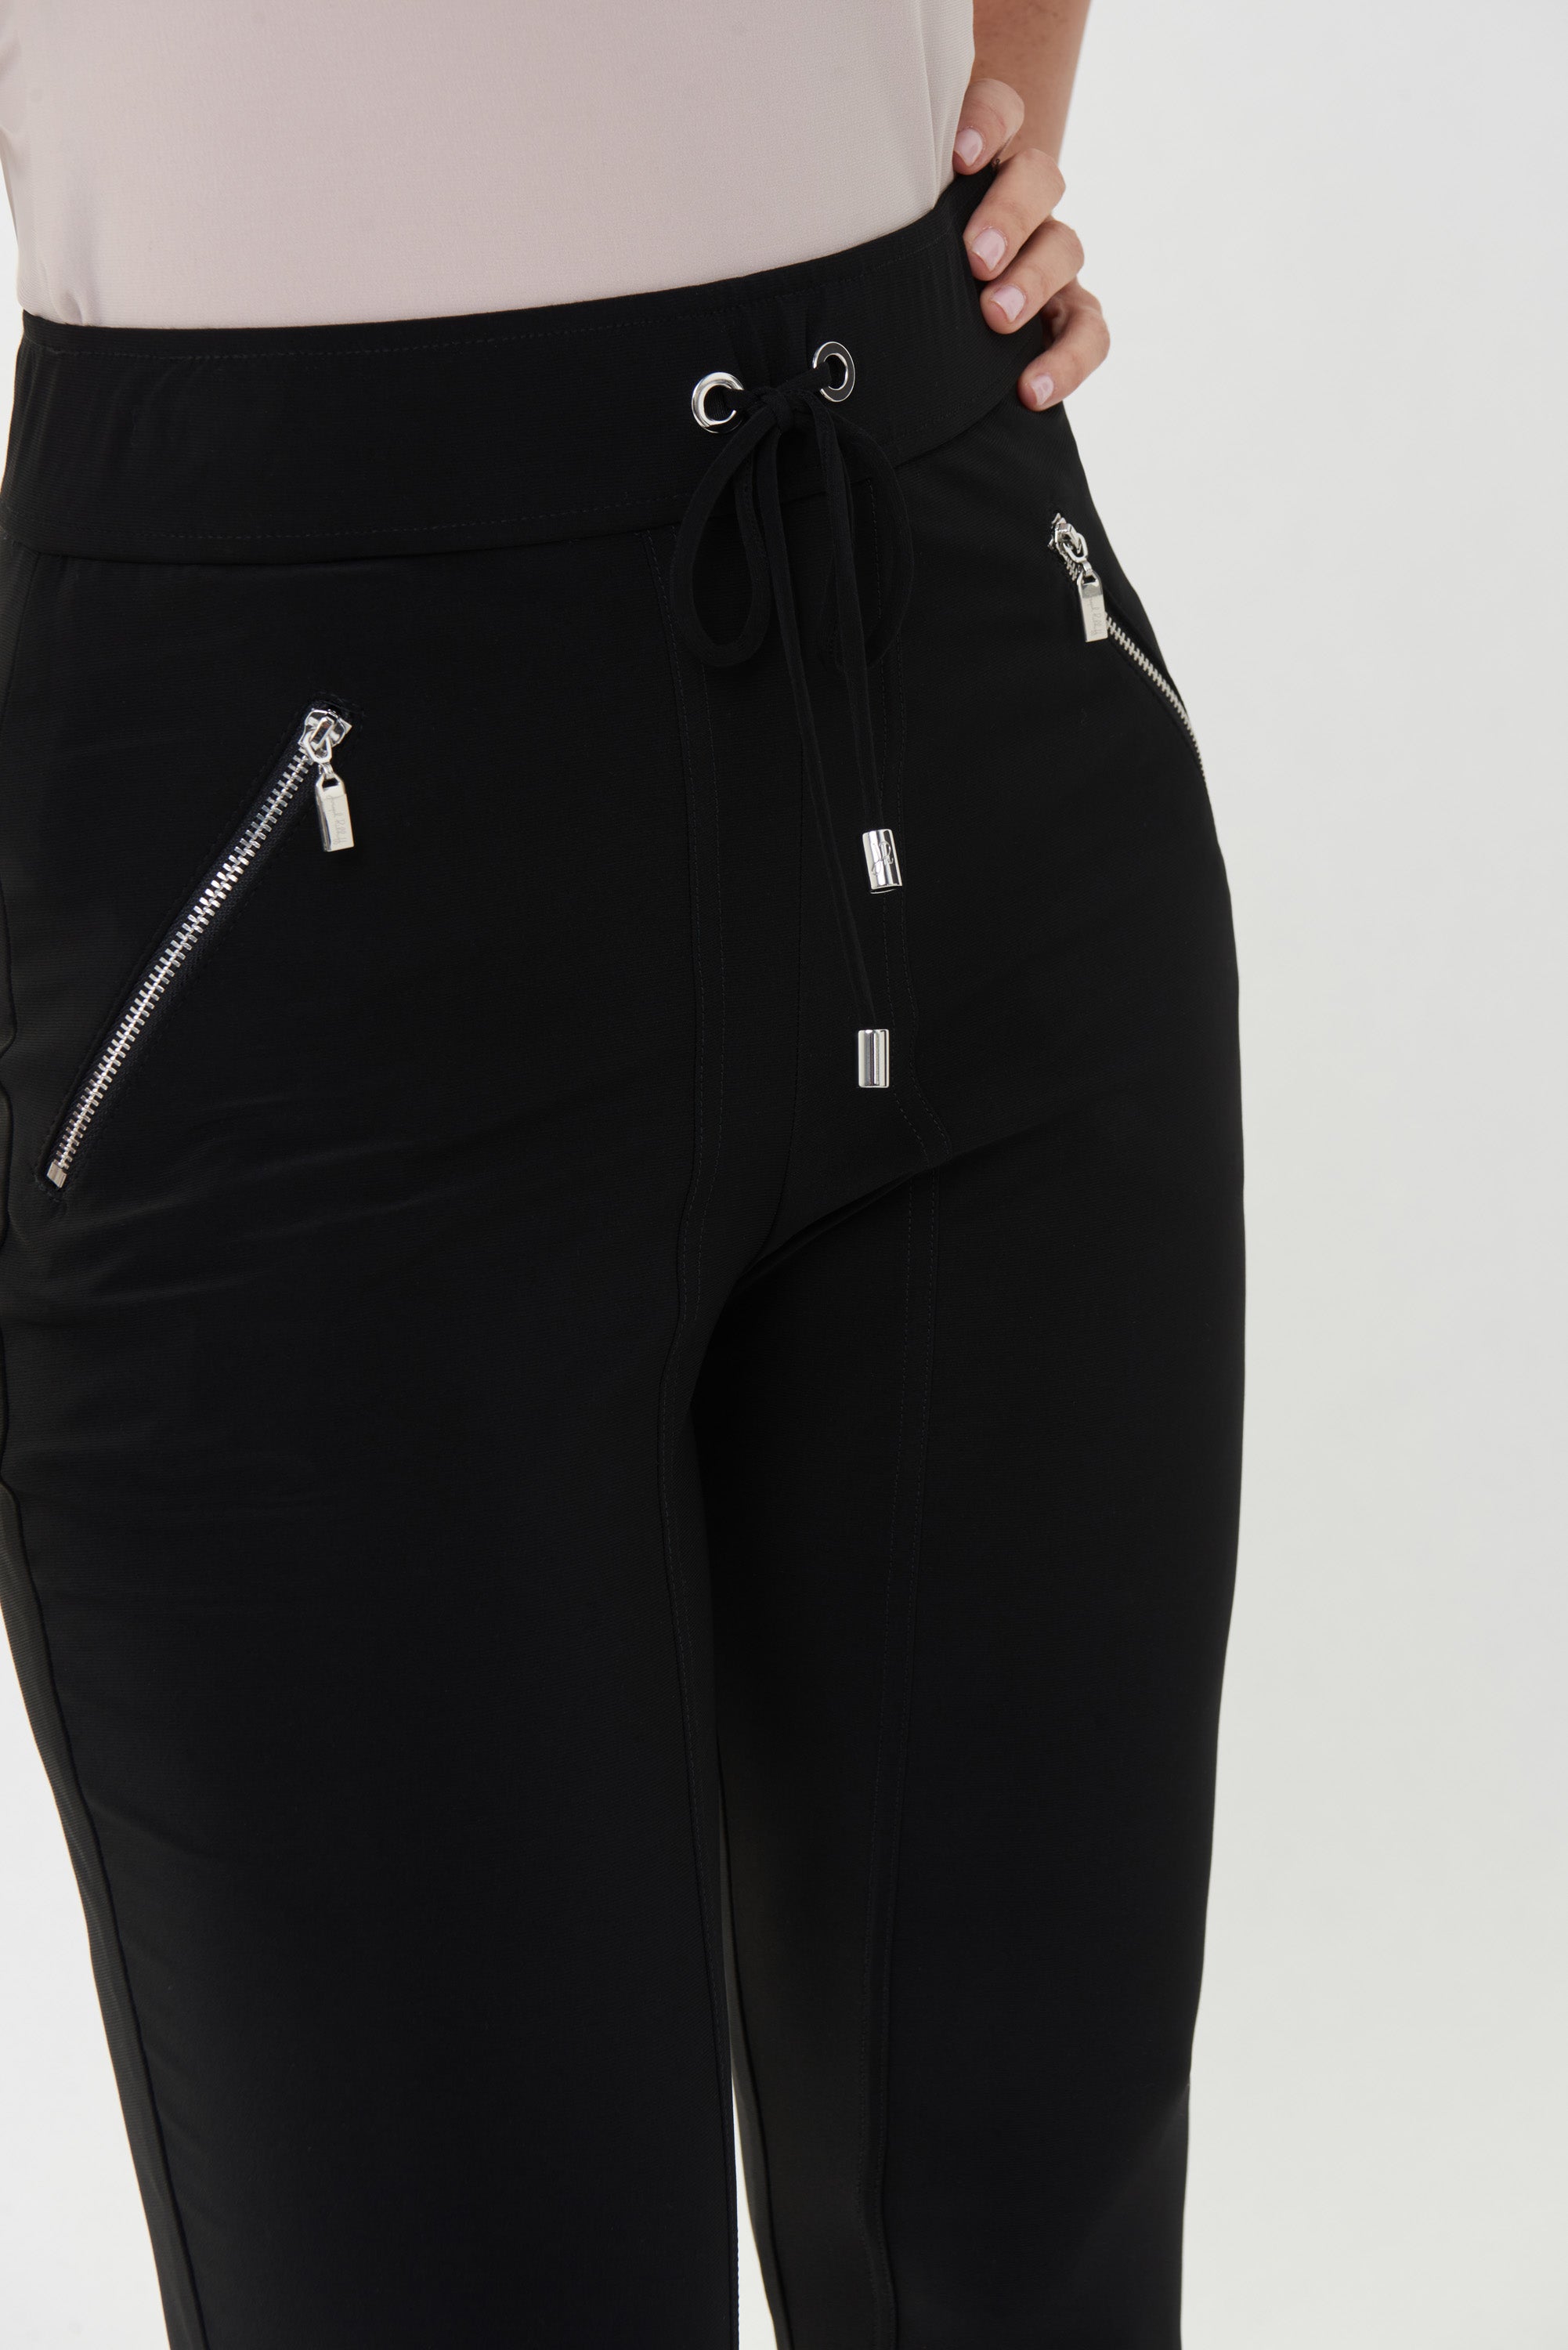 These Joseph Ribkoff Zip Pocket Tie Pants are an easy, comfortable choice for dressing up or down. These have an elastic drawstring waistband, functional angled zip pockets, front seam stitching and are finished with a cuffed jogger style ankle. 